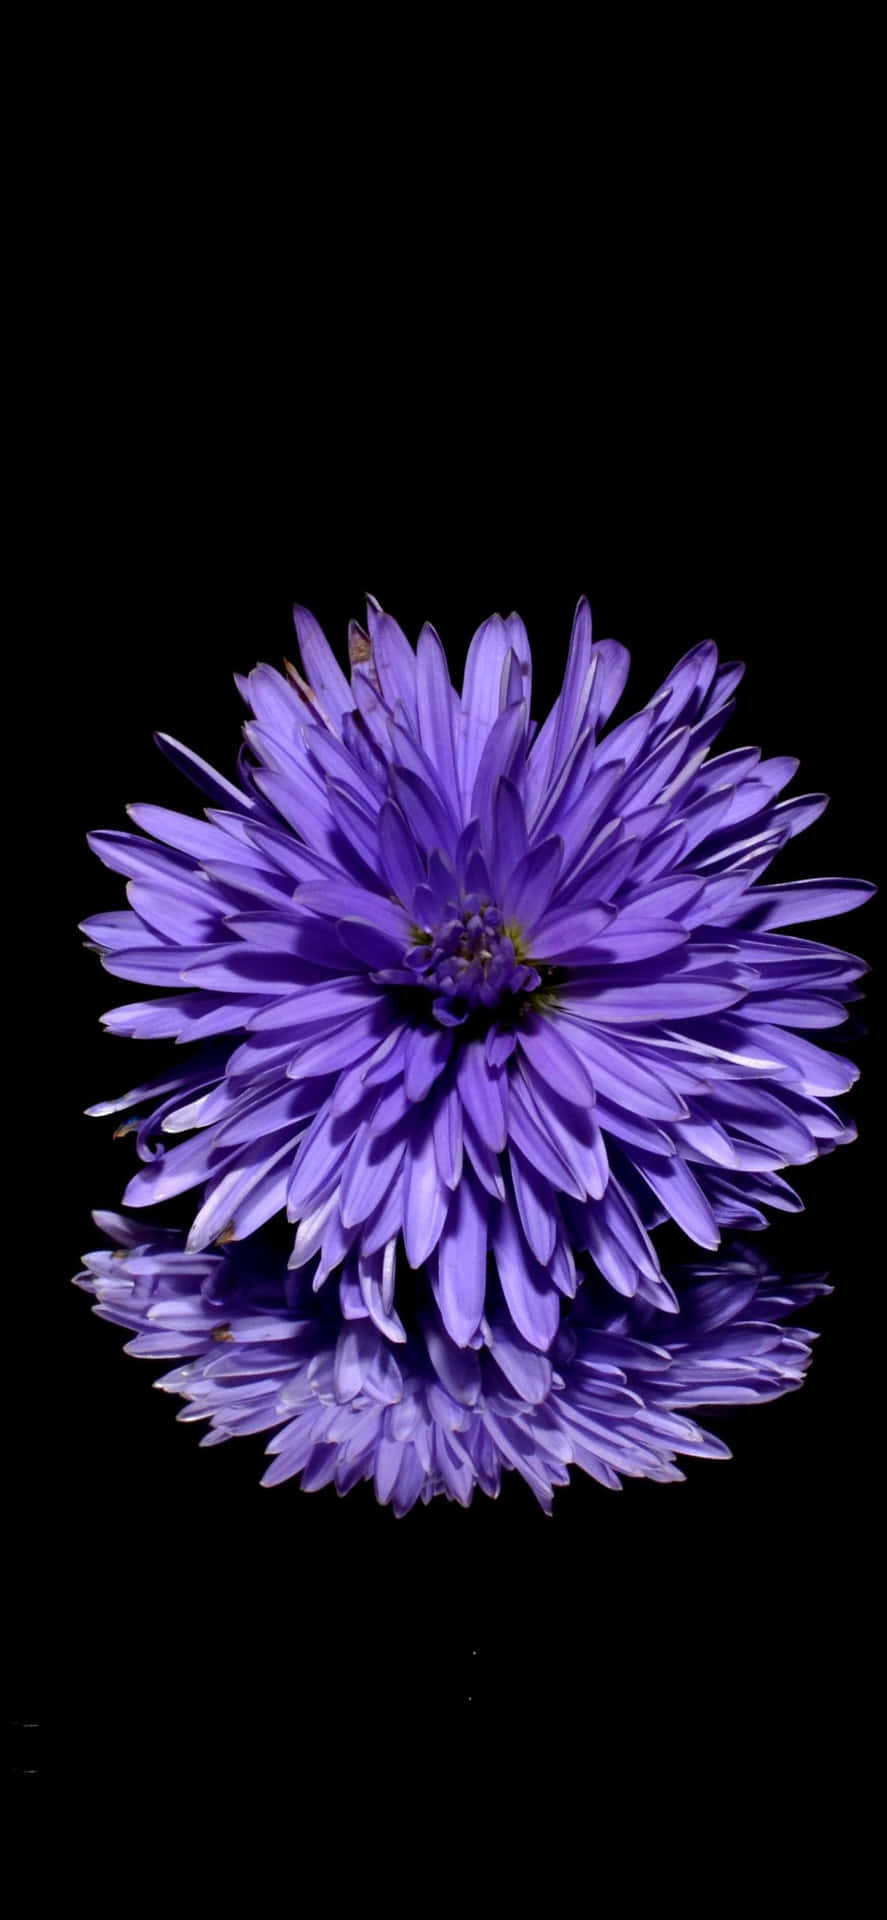 A Purple Flower Is Reflected On A Black Surface